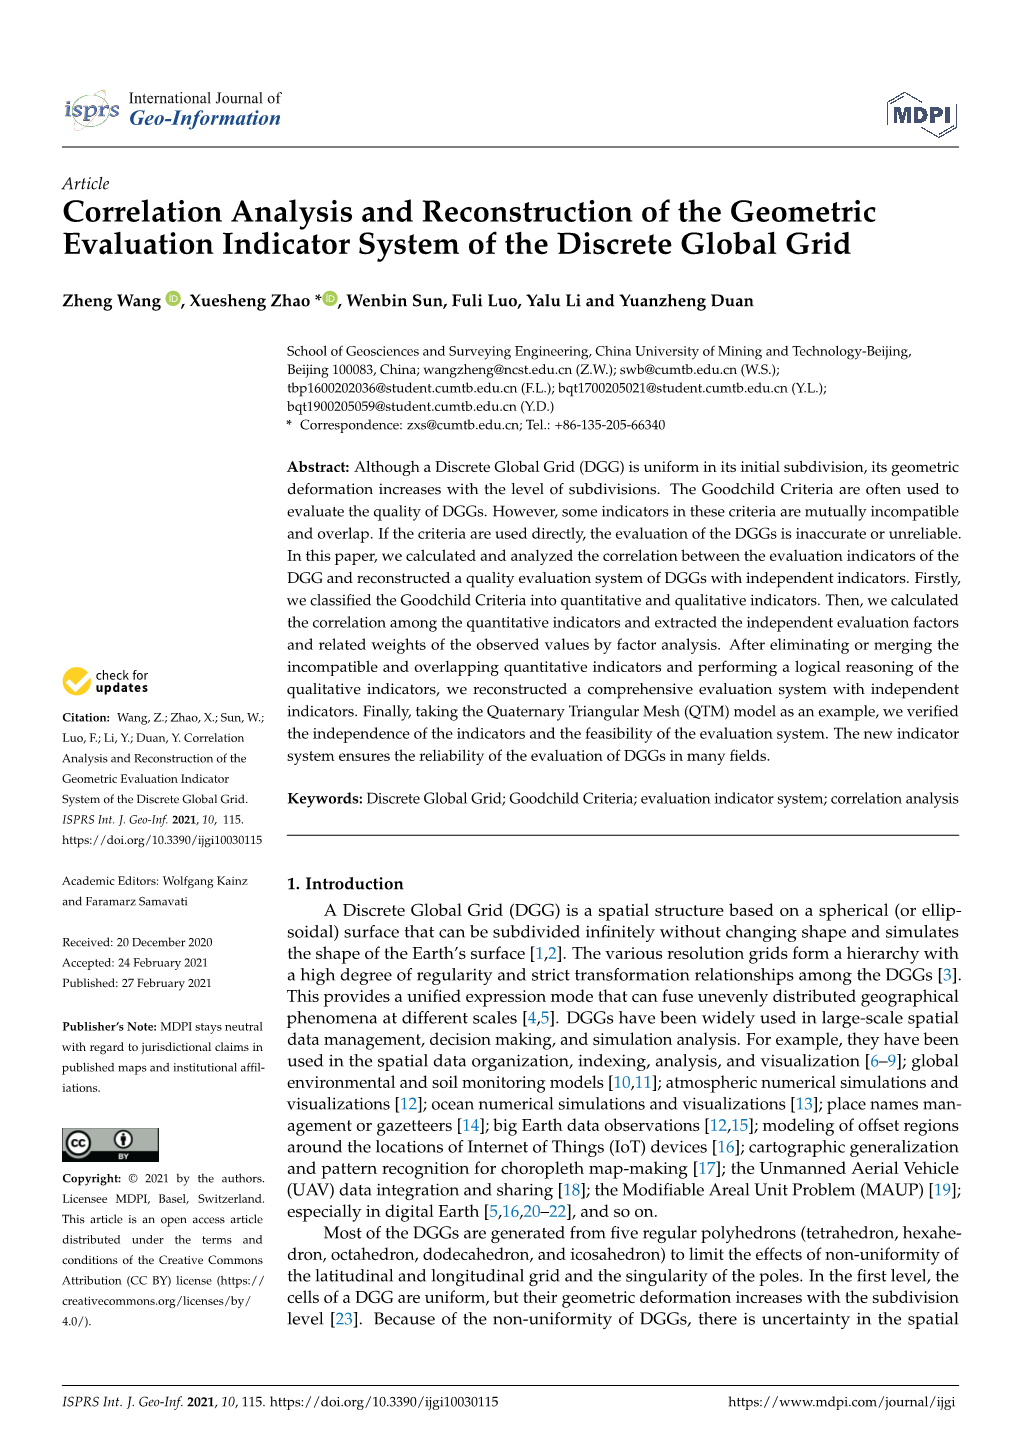 Correlation Analysis and Reconstruction of the Geometric Evaluation Indicator System of the Discrete Global Grid